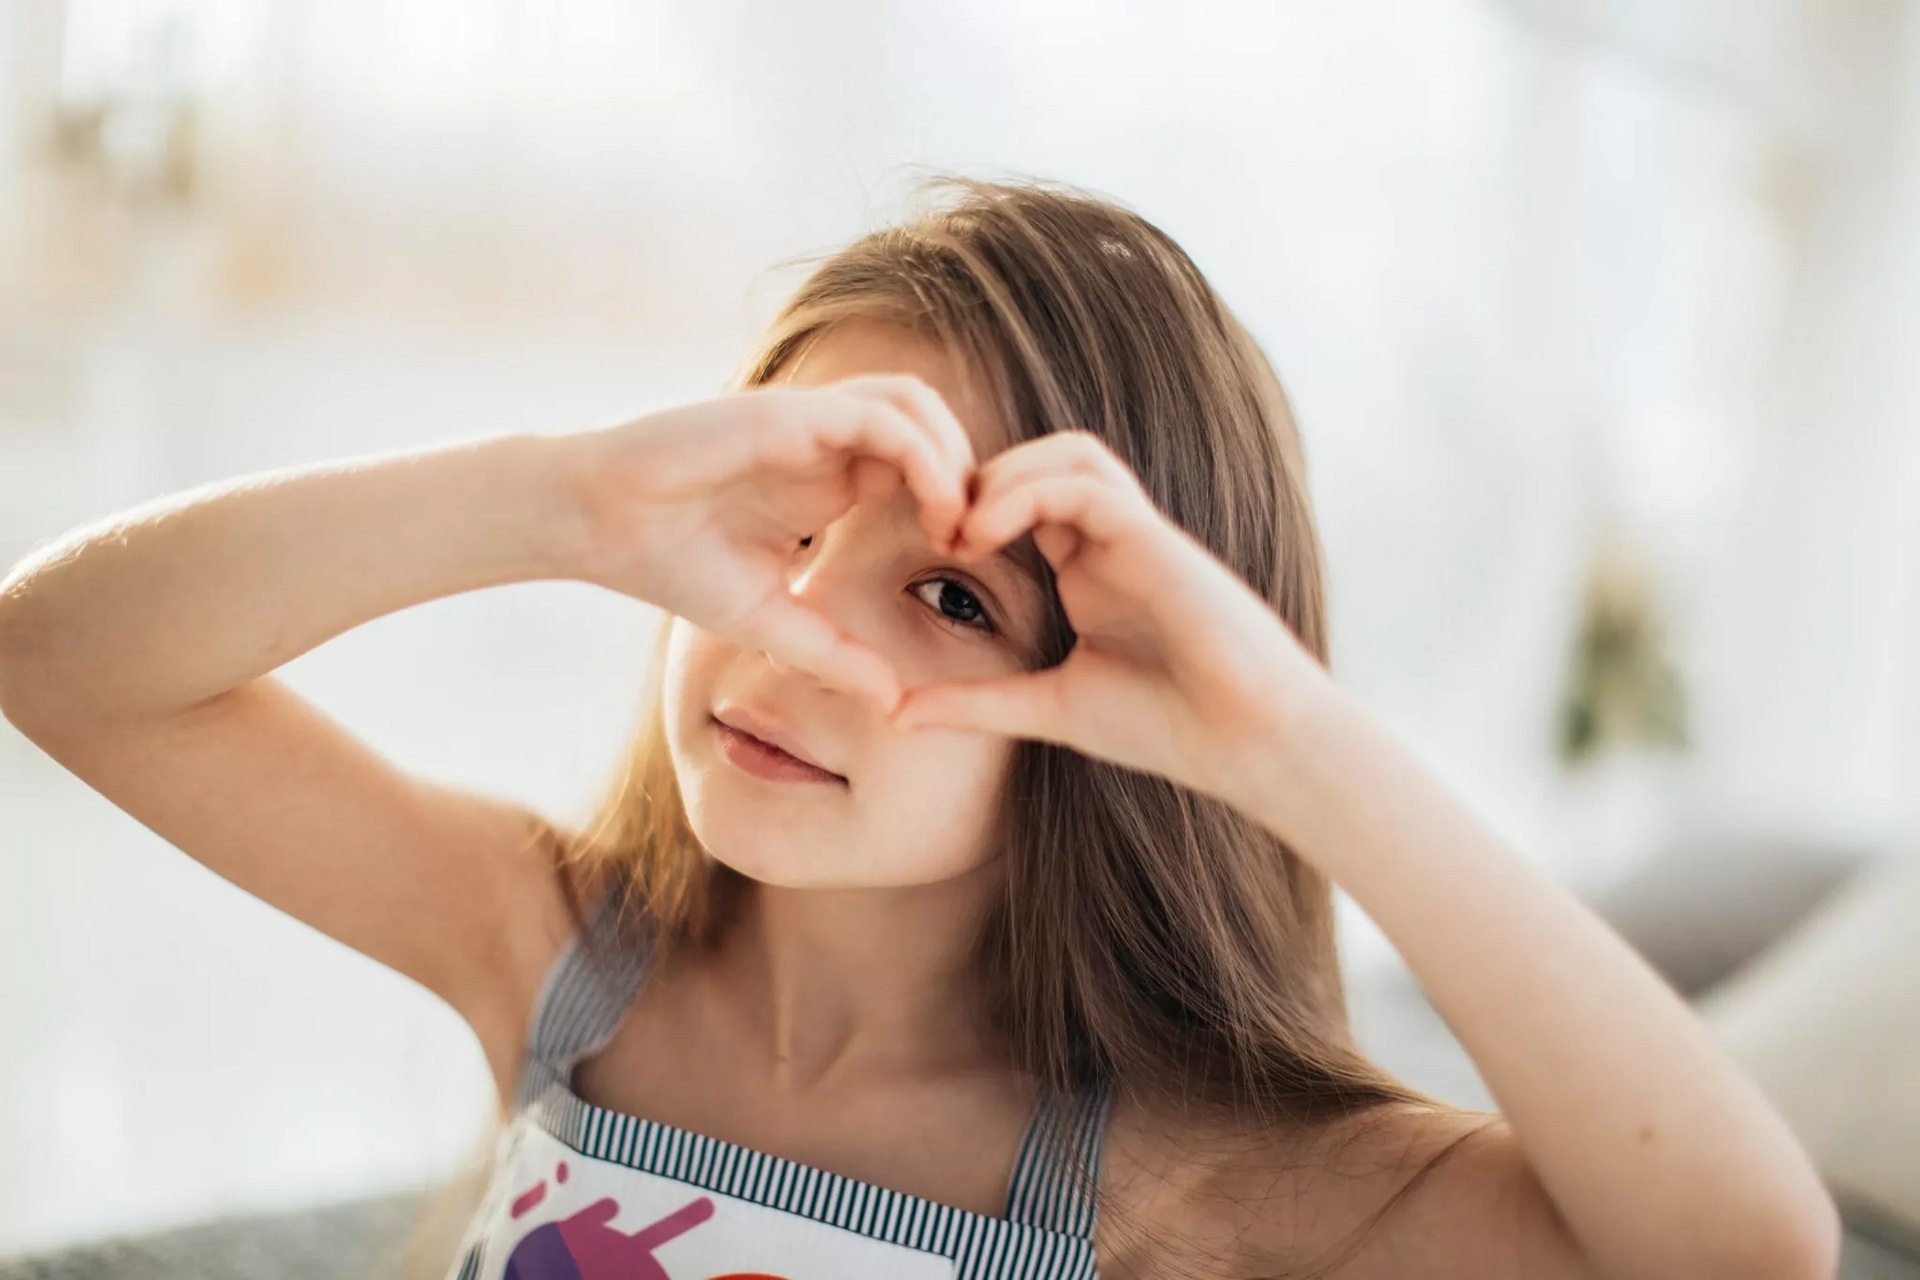 5 Fun Ways to Keep Your Kids Busy on Valentine’s Day